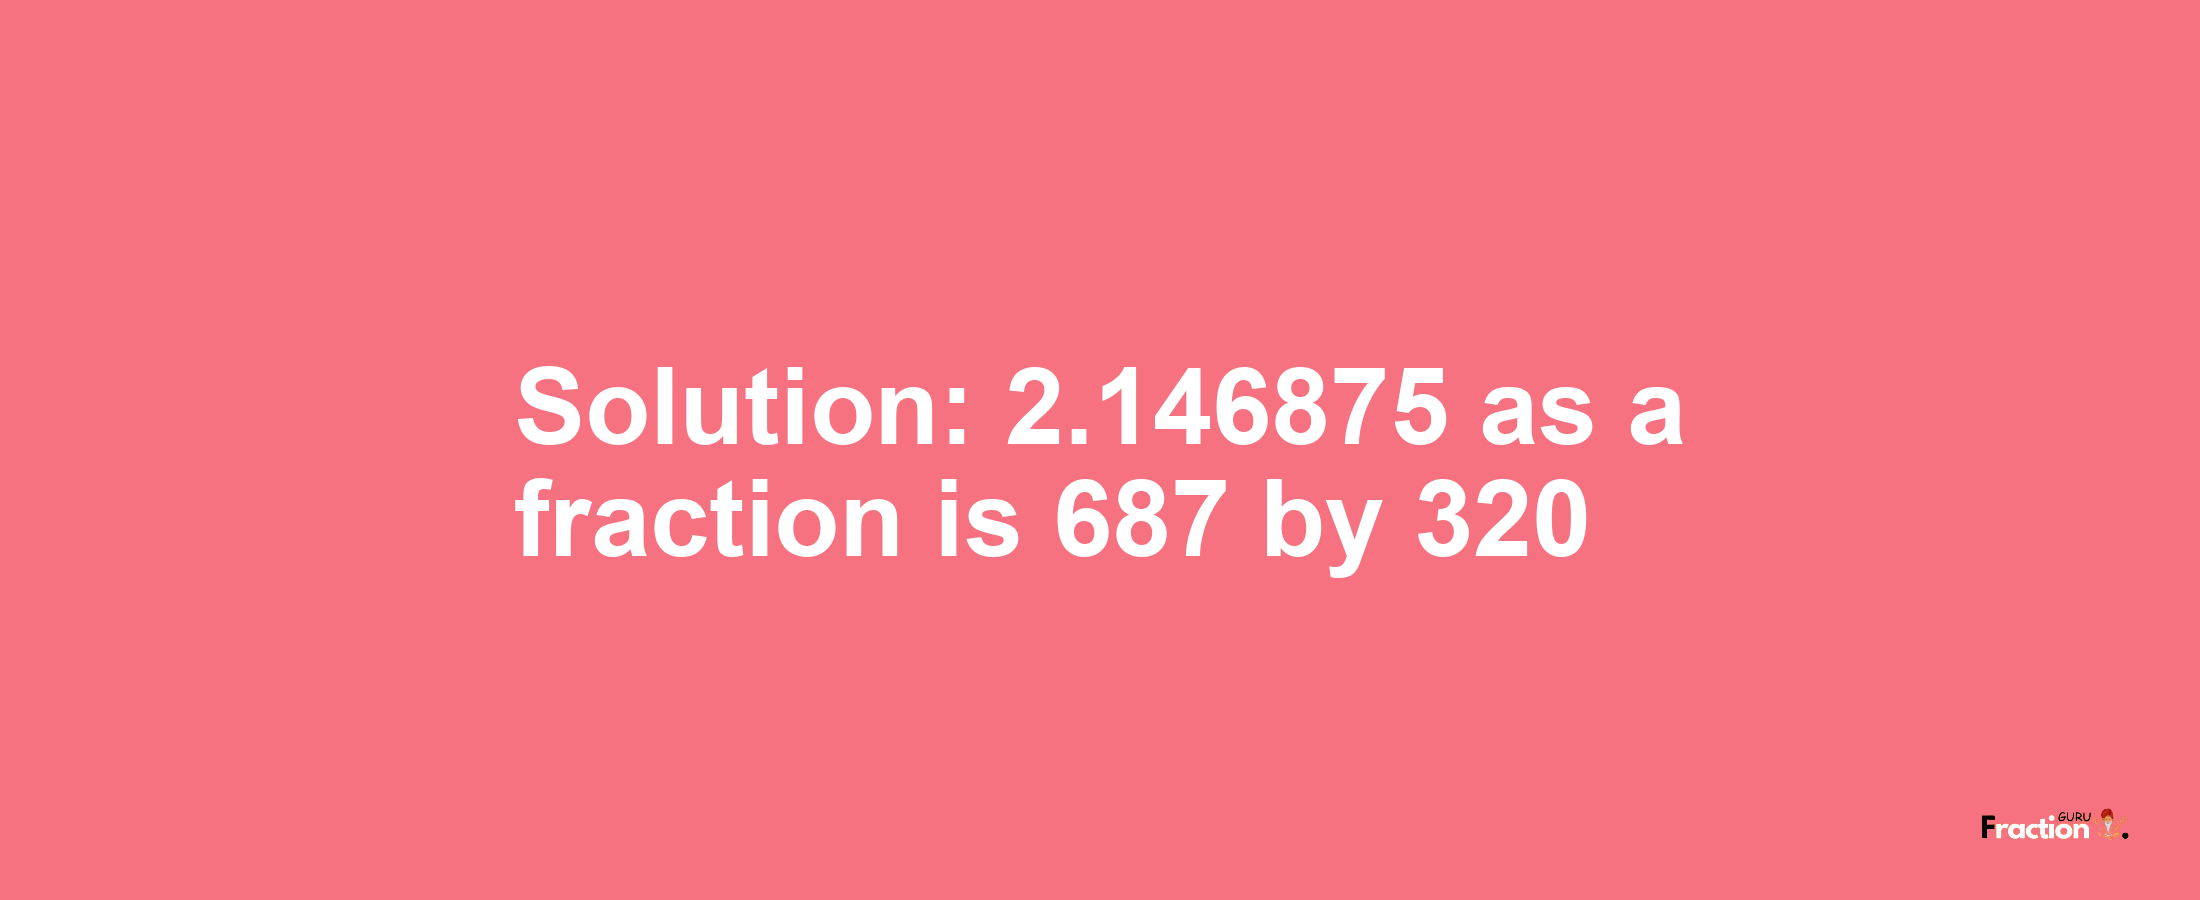 Solution:2.146875 as a fraction is 687/320